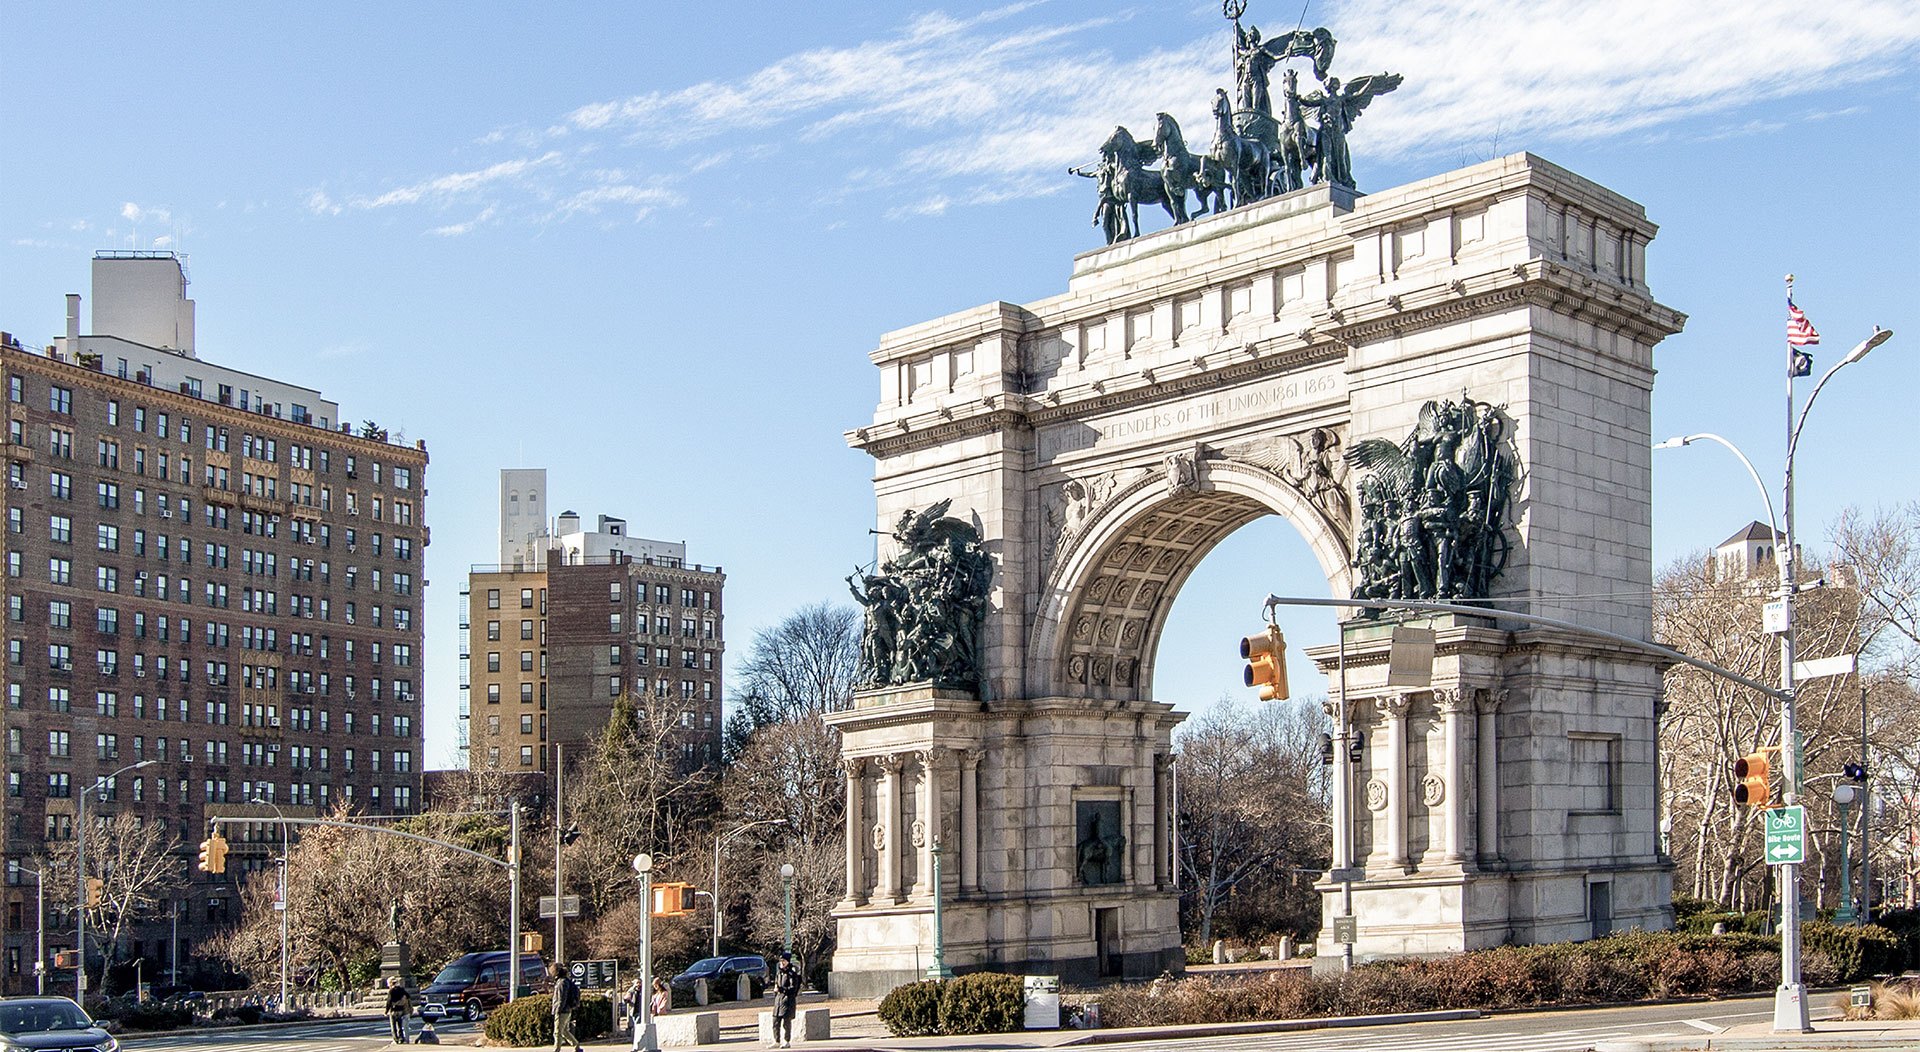 Discover properties for sale and rent in Downtown Brooklyn and around Prospect Park